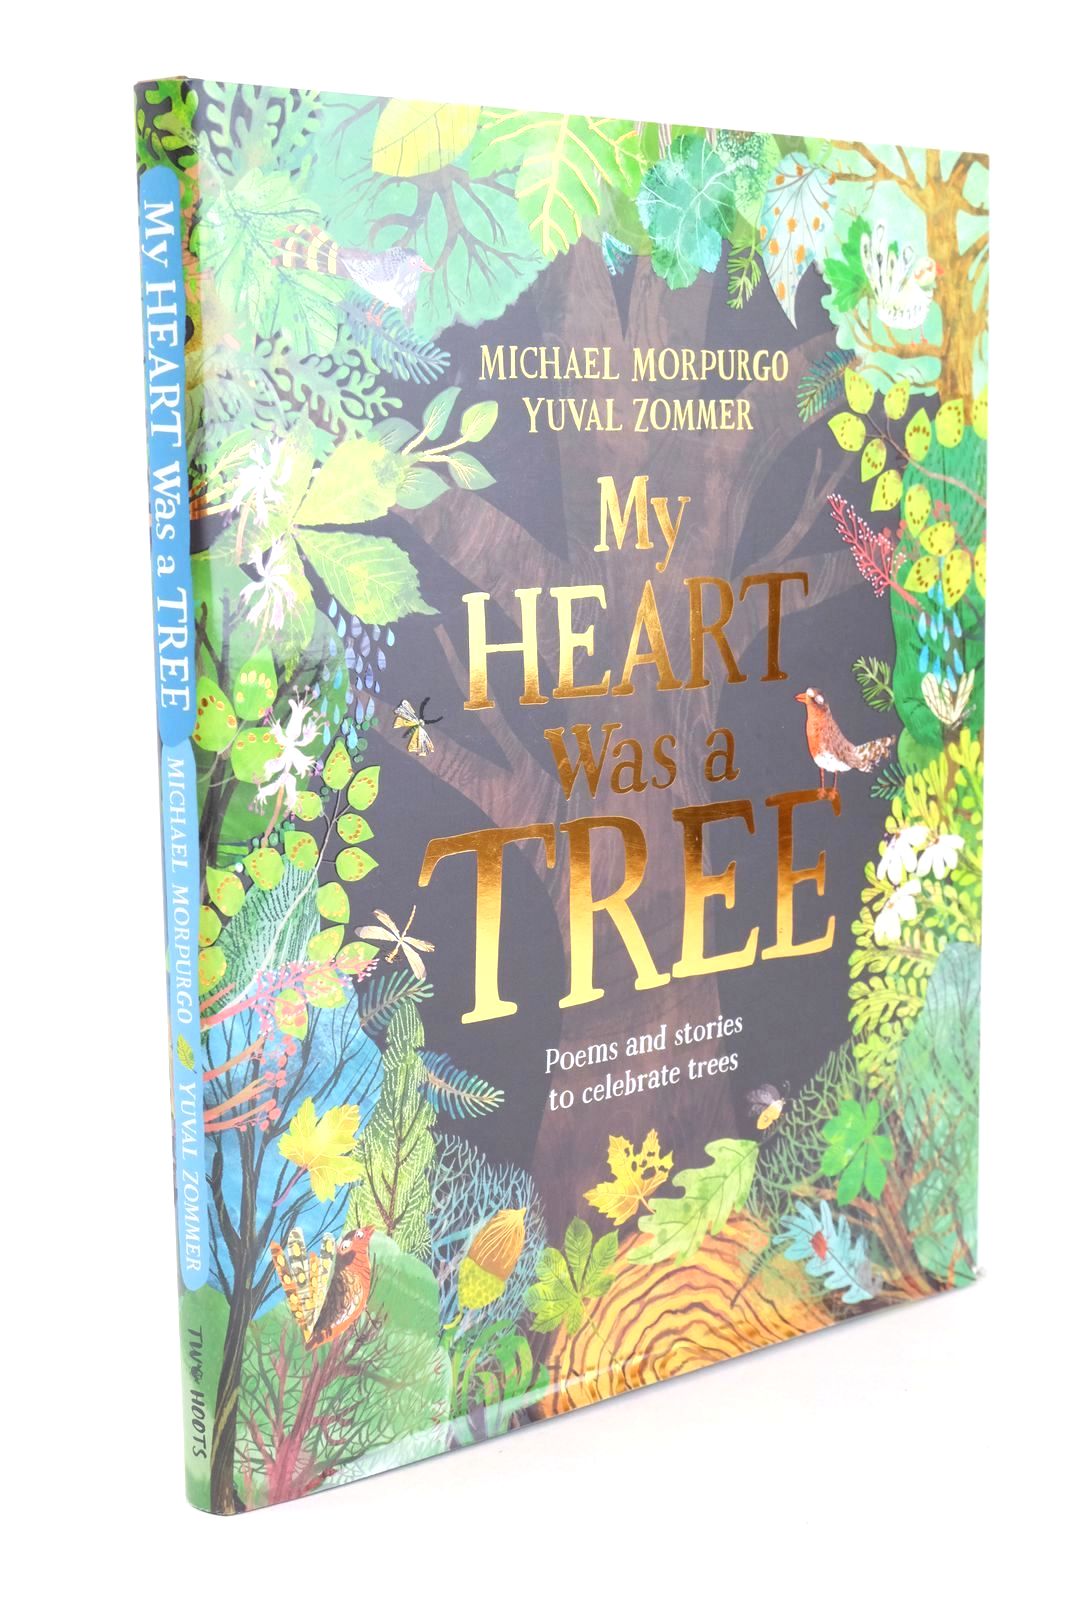 Photo of MY HEART WAS A TREE written by Morpurgo, Michael illustrated by Zommer, Yuval published by Two Hoots (STOCK CODE: 1325606)  for sale by Stella & Rose's Books